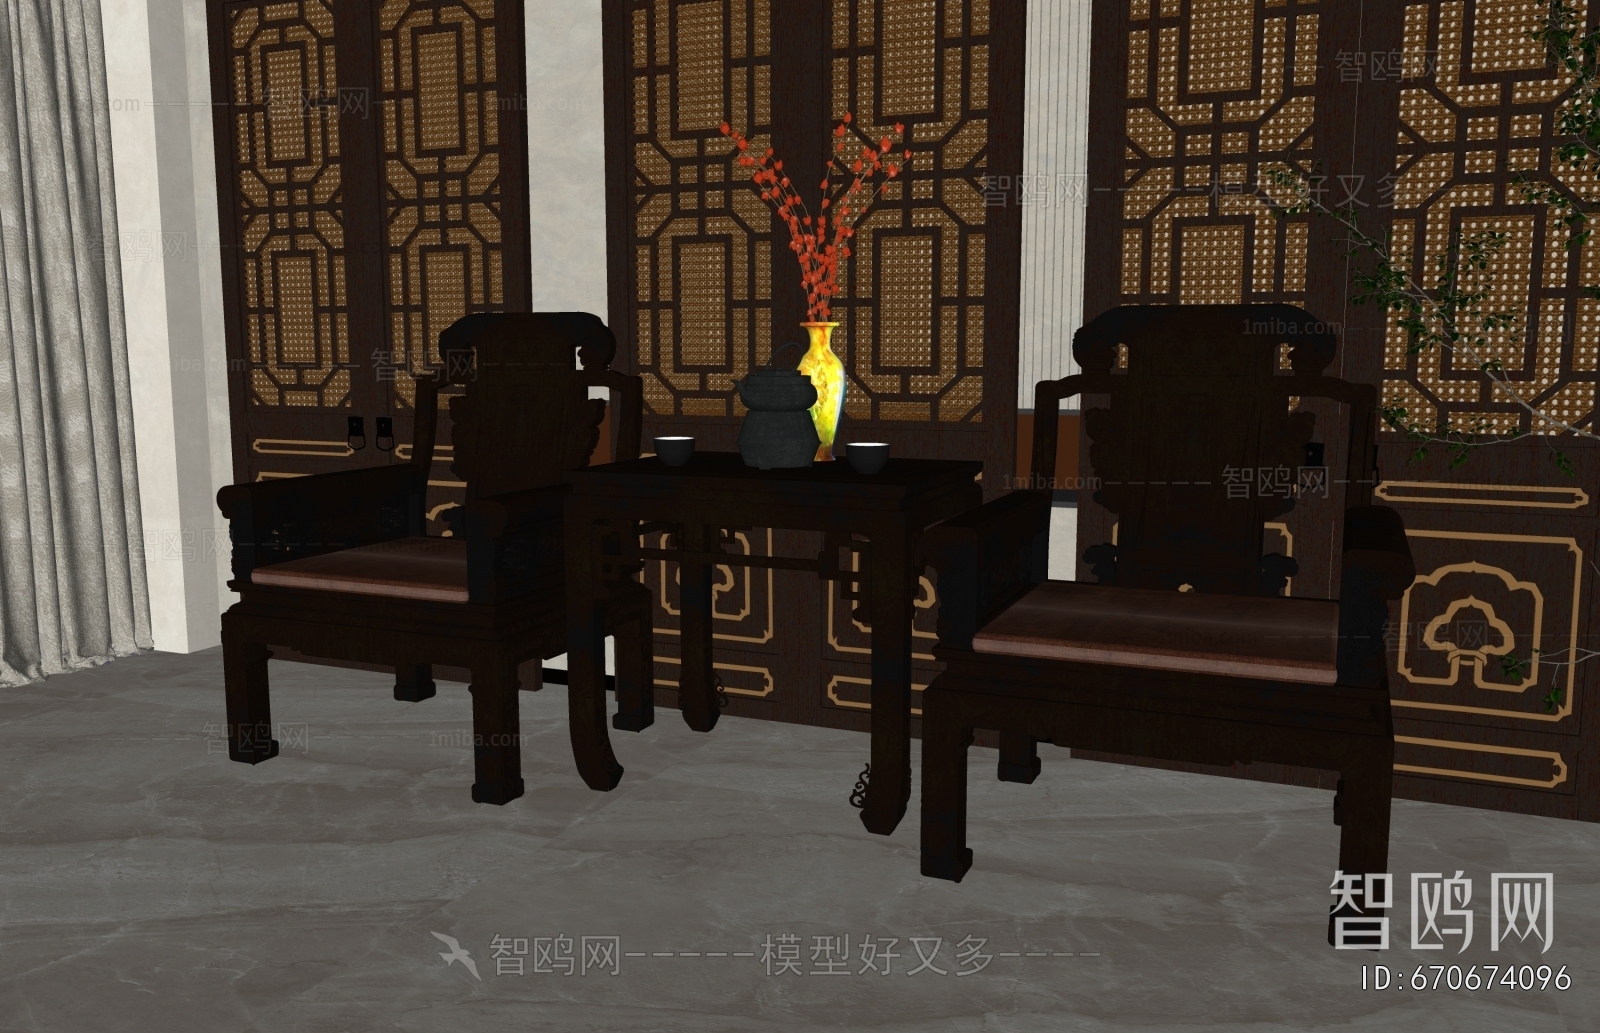 New Chinese Style Chinese Style Tea Tables And Chairs